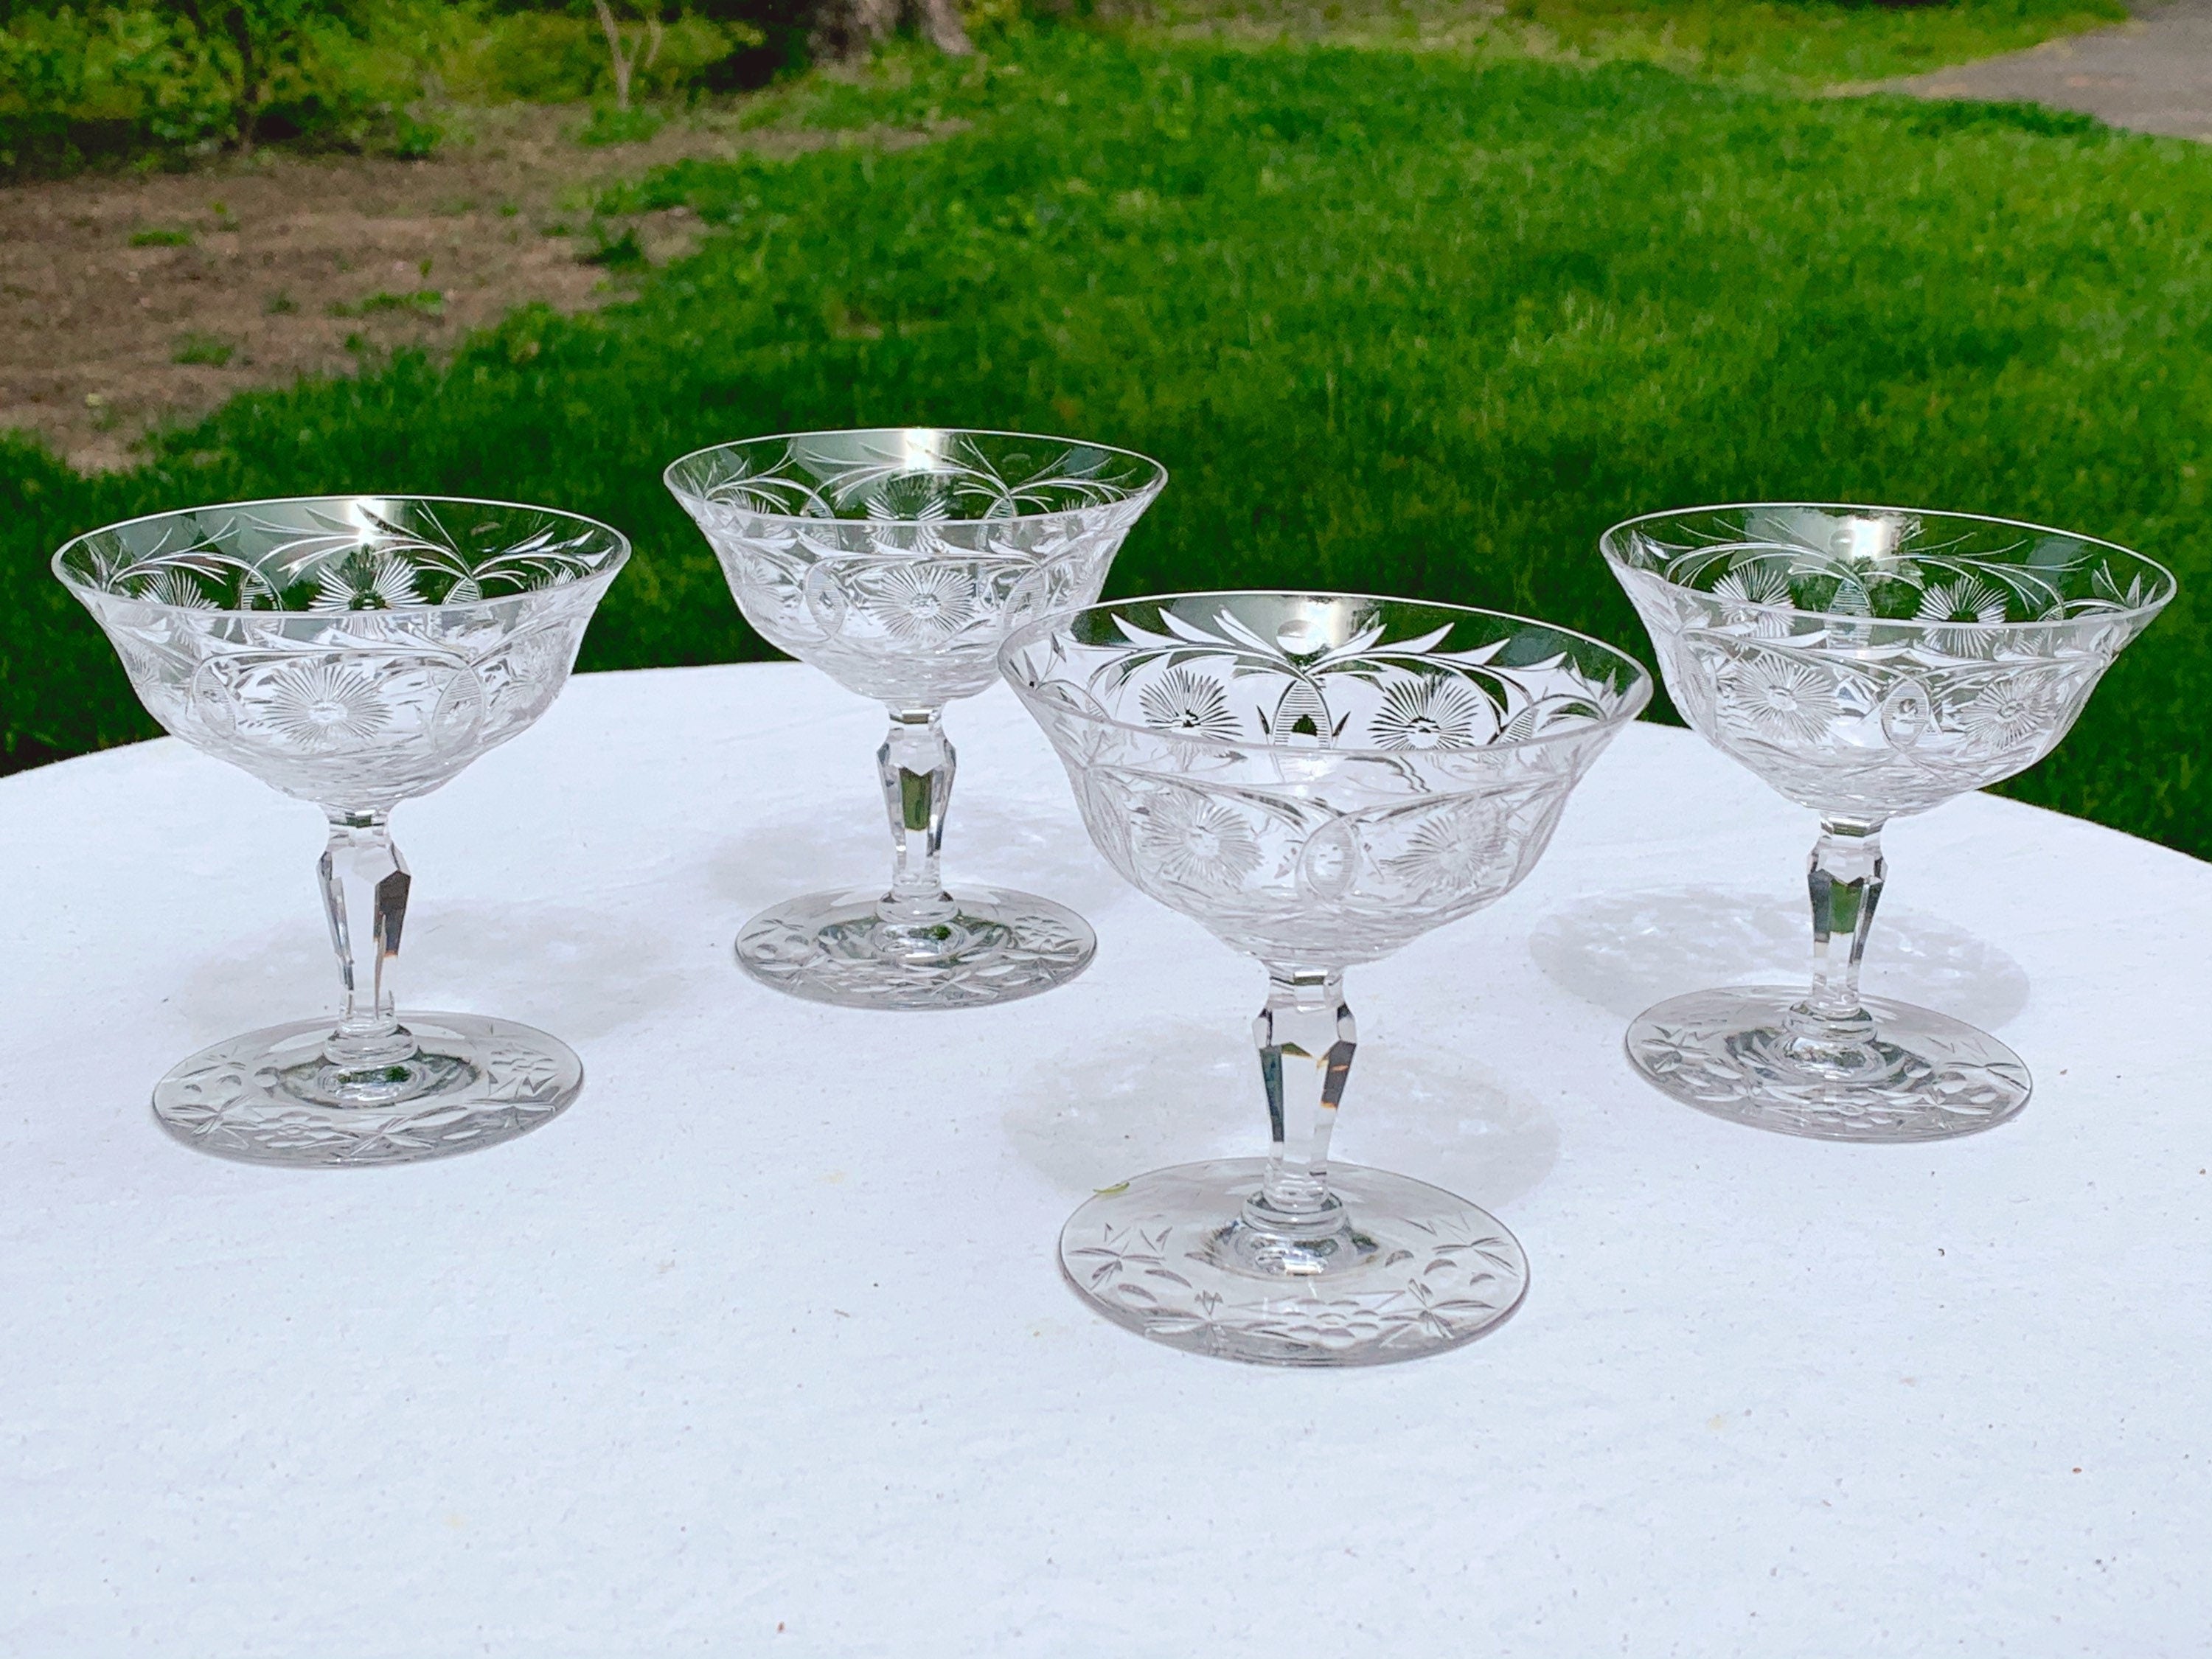 Vintage Etched Clear Crystal Champagne Coupe Glasses